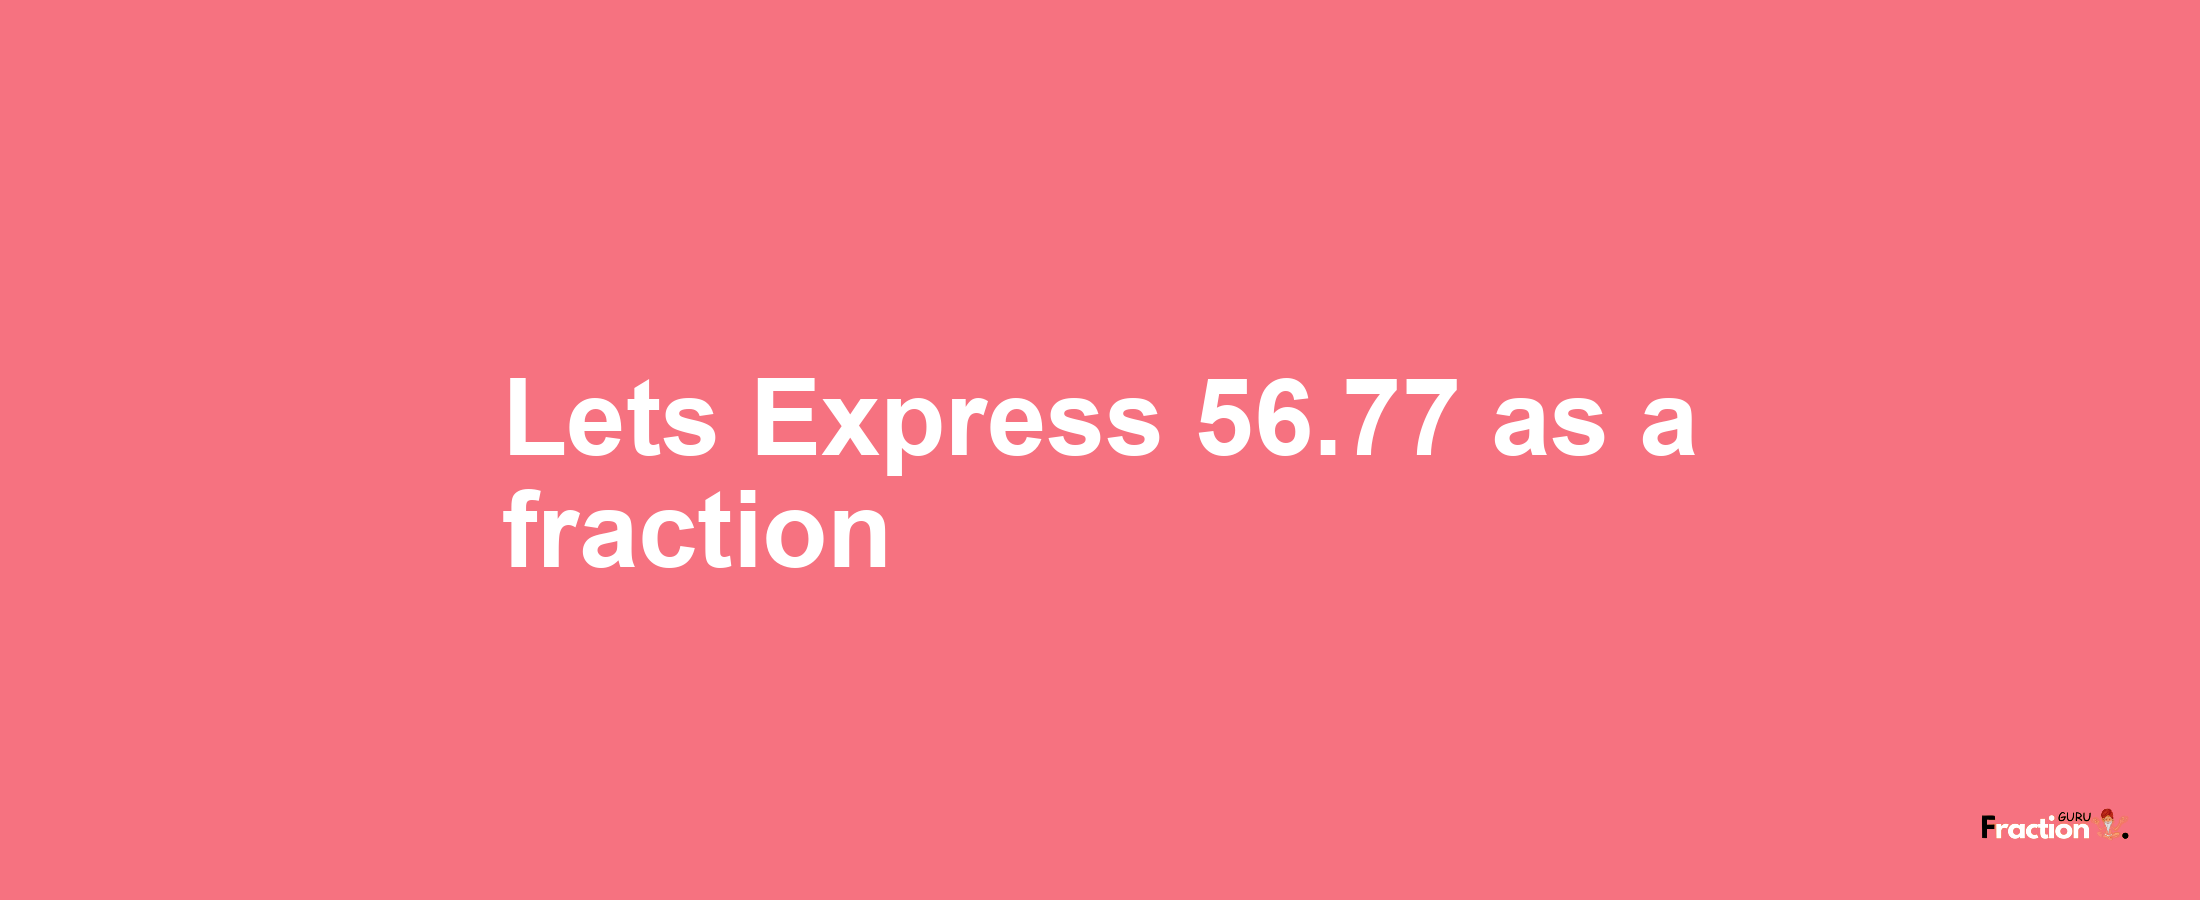 Lets Express 56.77 as afraction